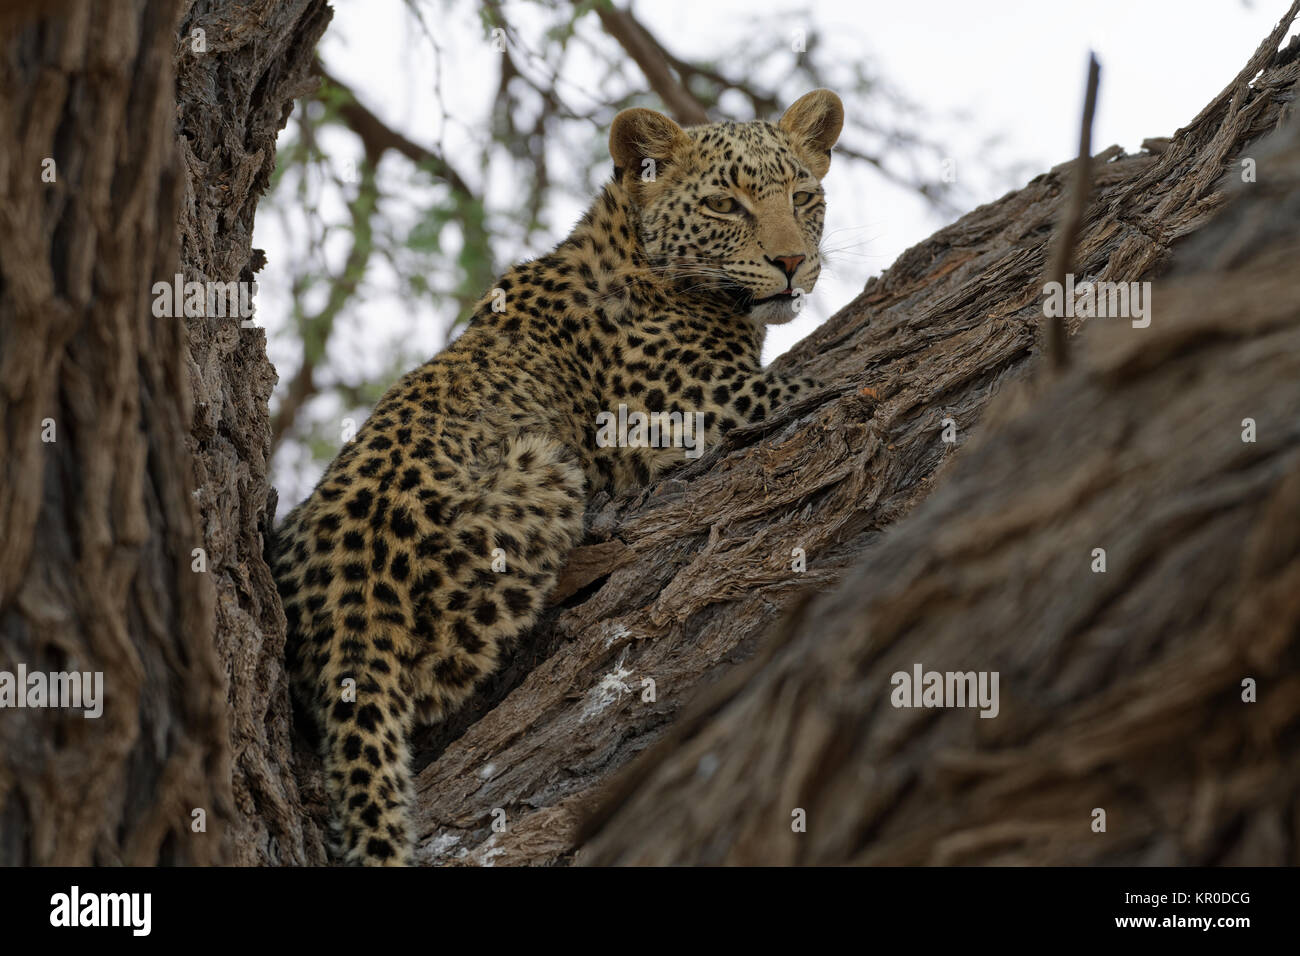 Leopard (Panthera pardus), lying in a tree, alert, Kgalagadi Transfrontier Park, Northern Cape, South Africa, Africa Stock Photo